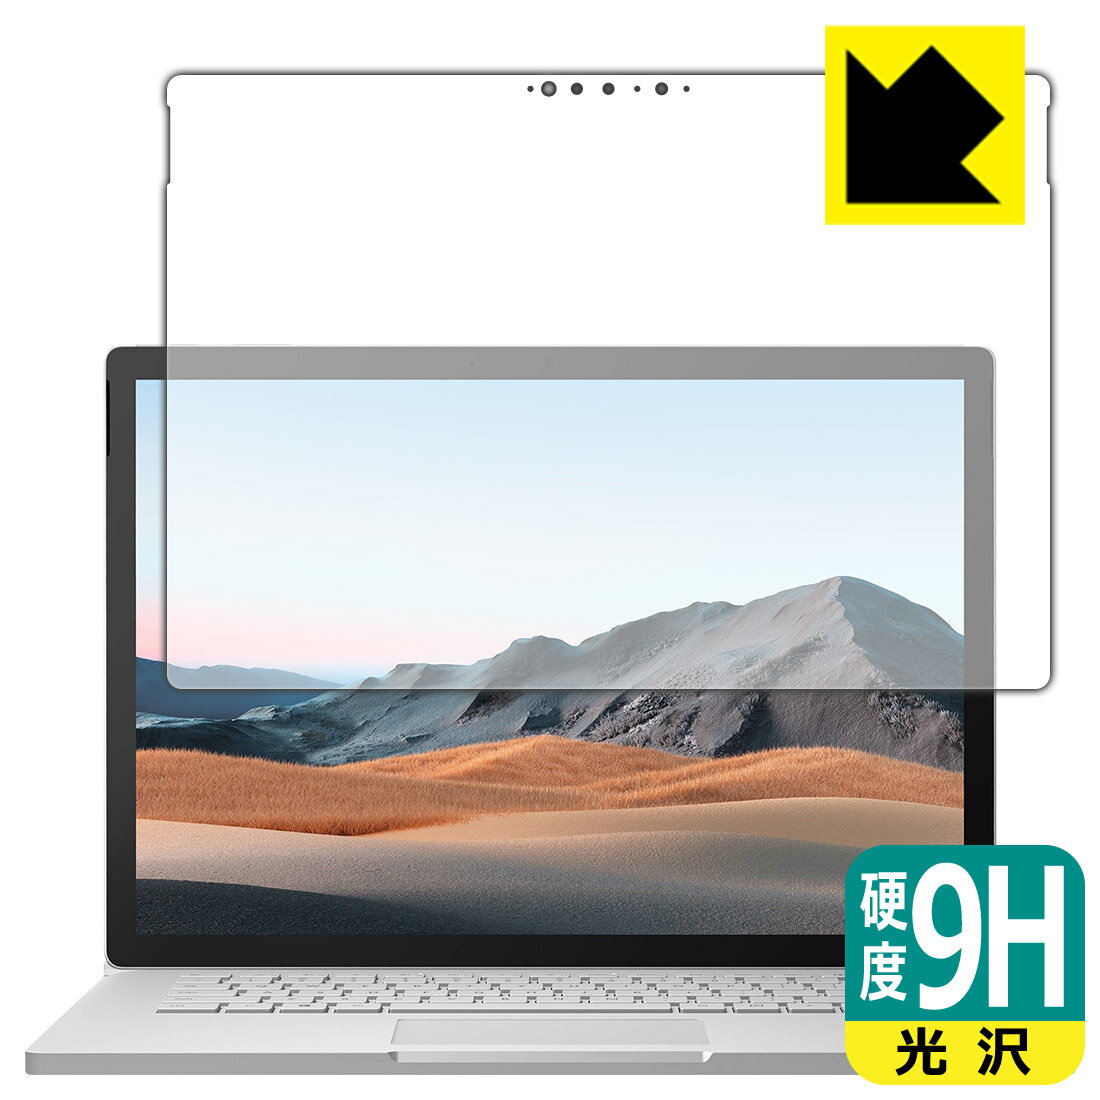 9HdxyzیtB T[tFX Surface Book 3 (15C`) tp { А